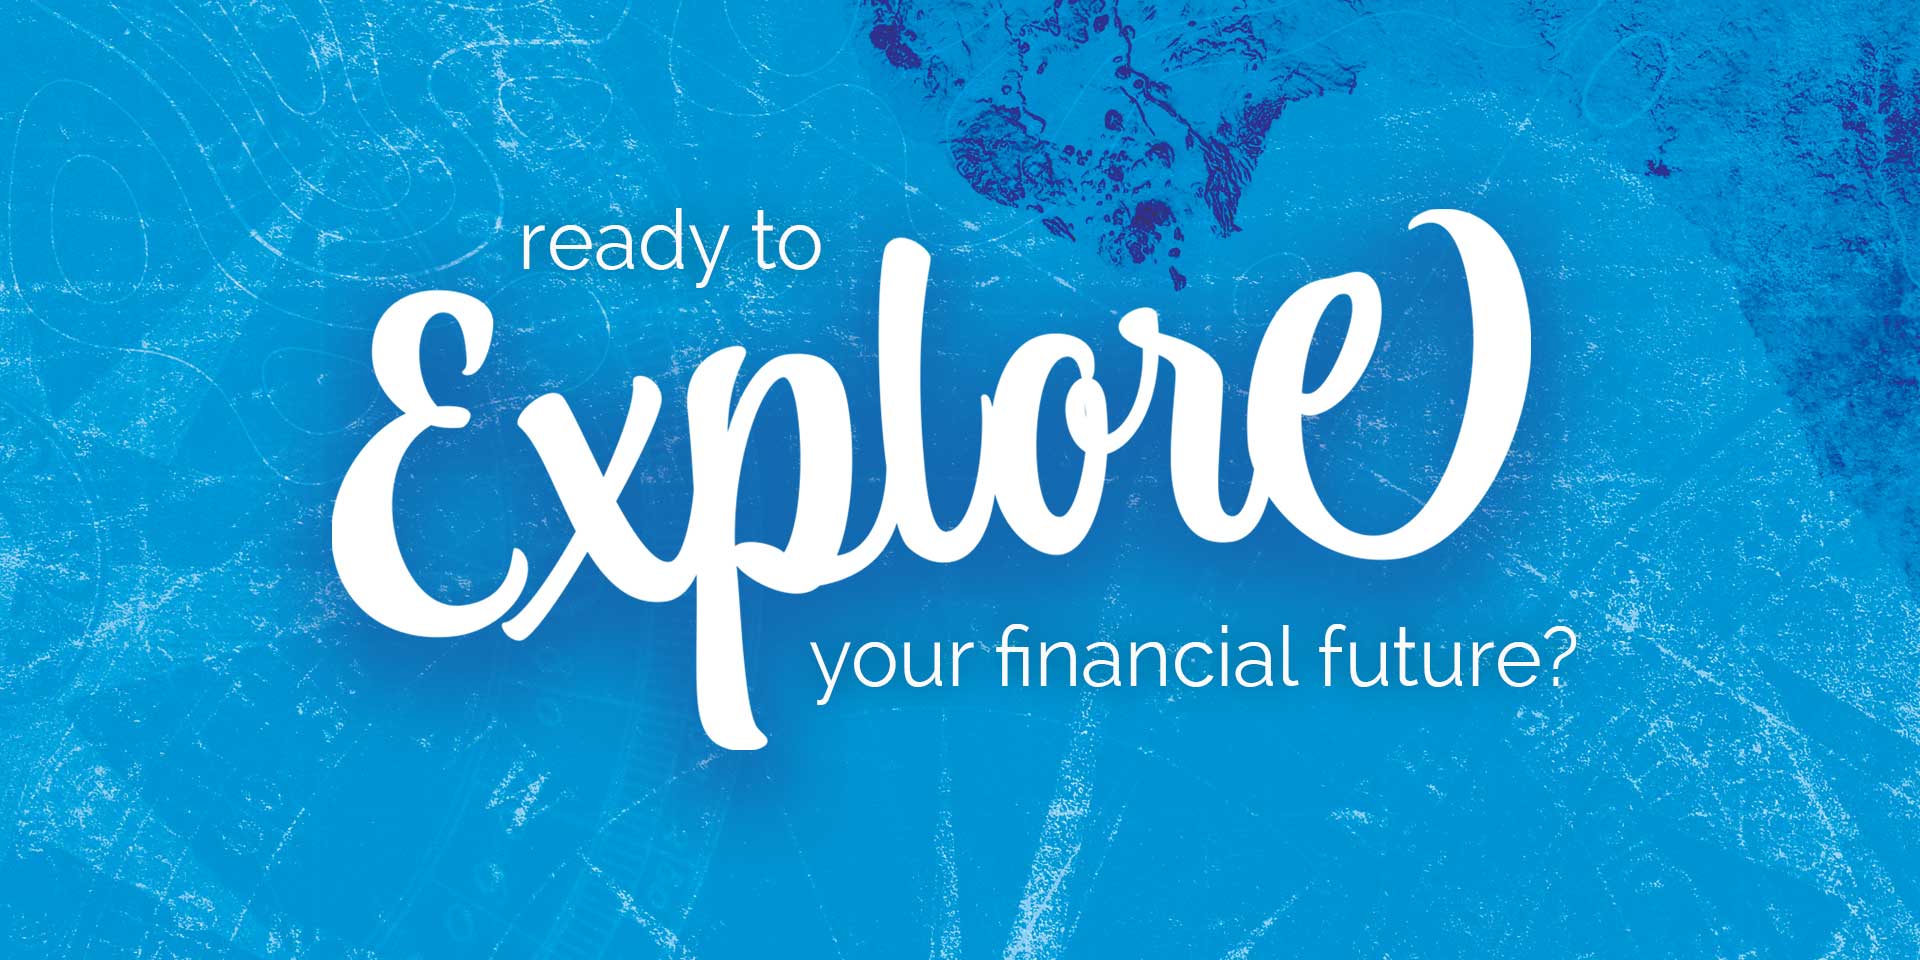 Ready to explore your financial future?